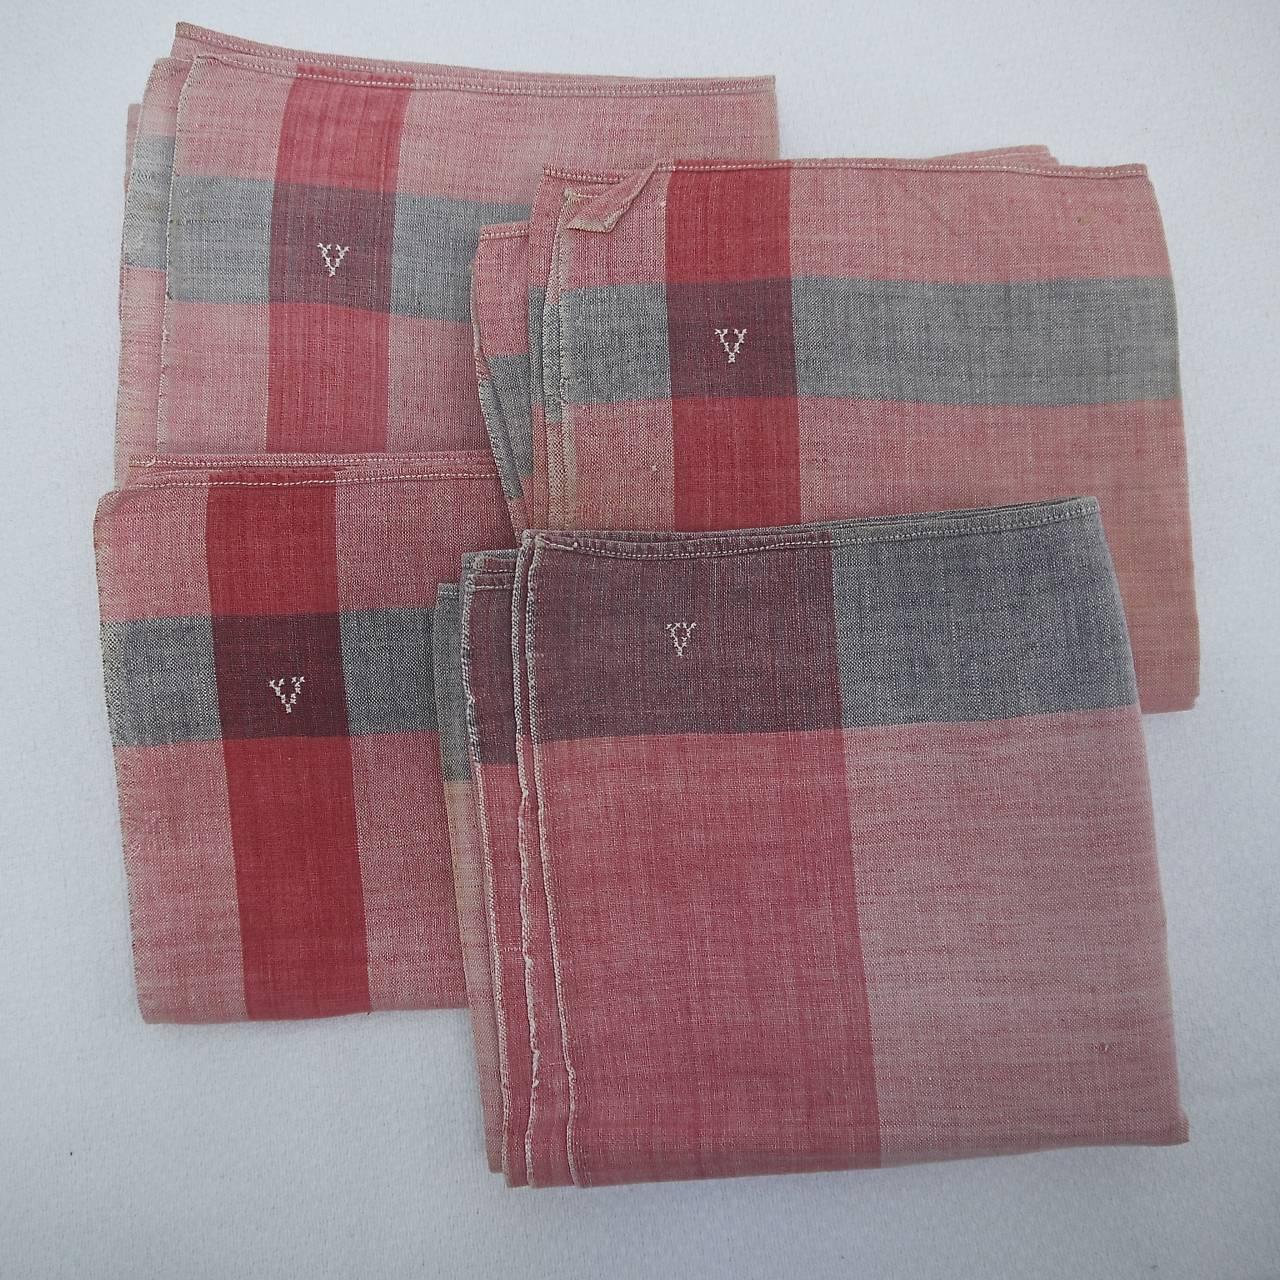 Set of four French faded indigo and red cotton mouchoirs with a letter V monogram on each corner .One is of a different design.